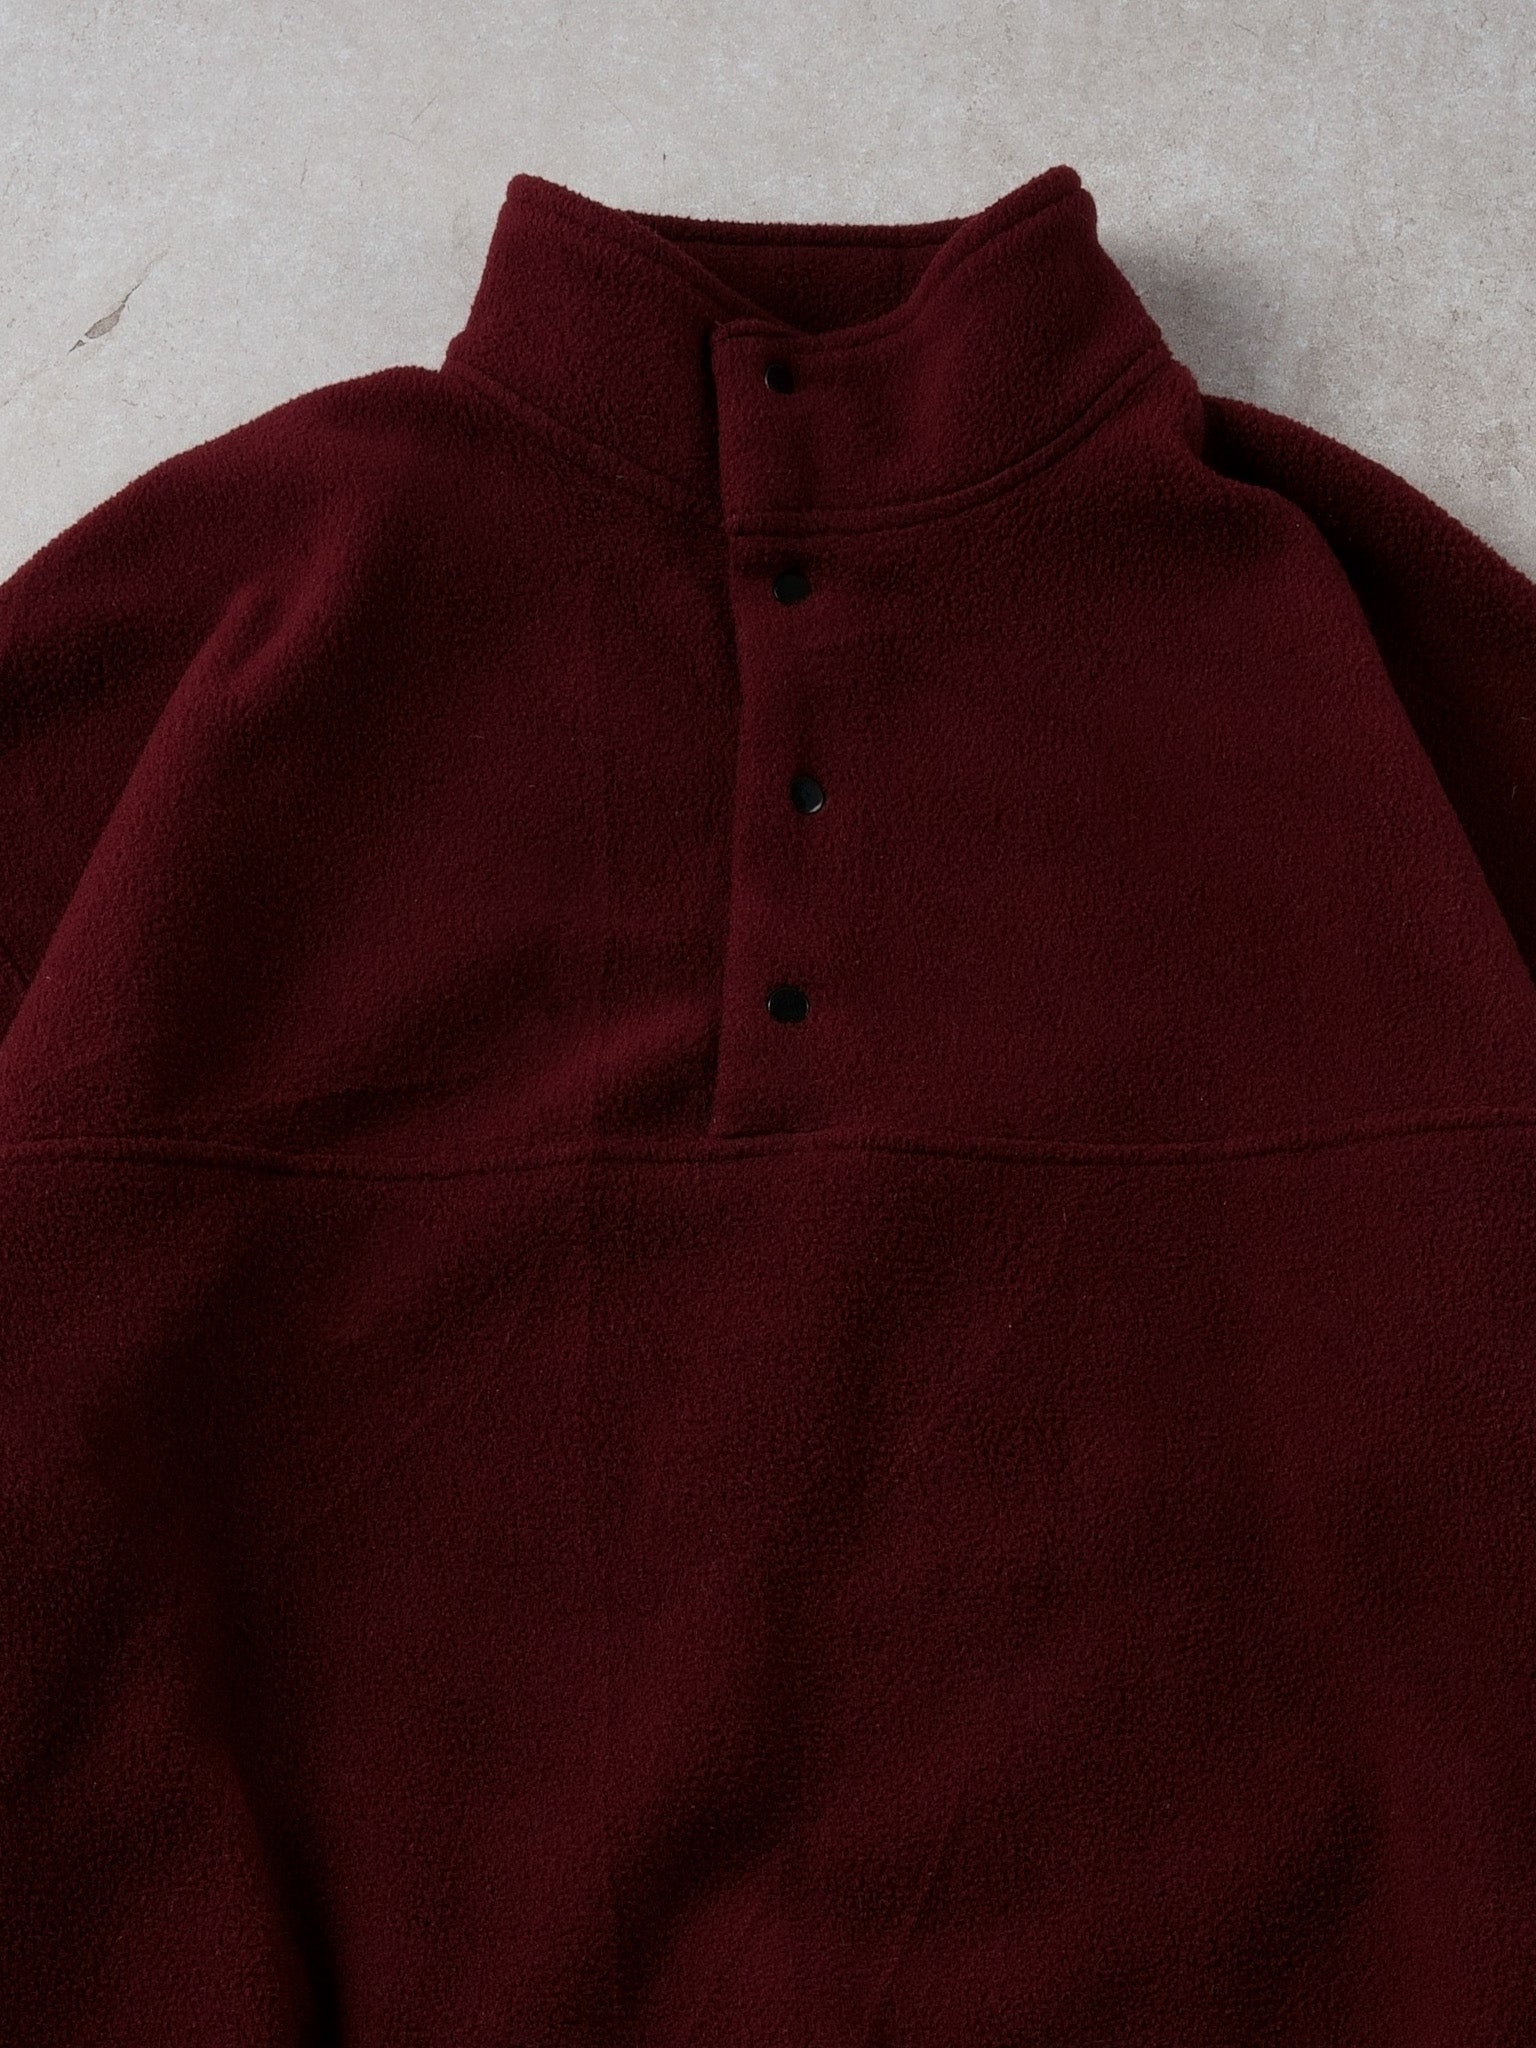 Vintage 90s Maroon Russell Athletics Fleece 1/4 Button Up (L)